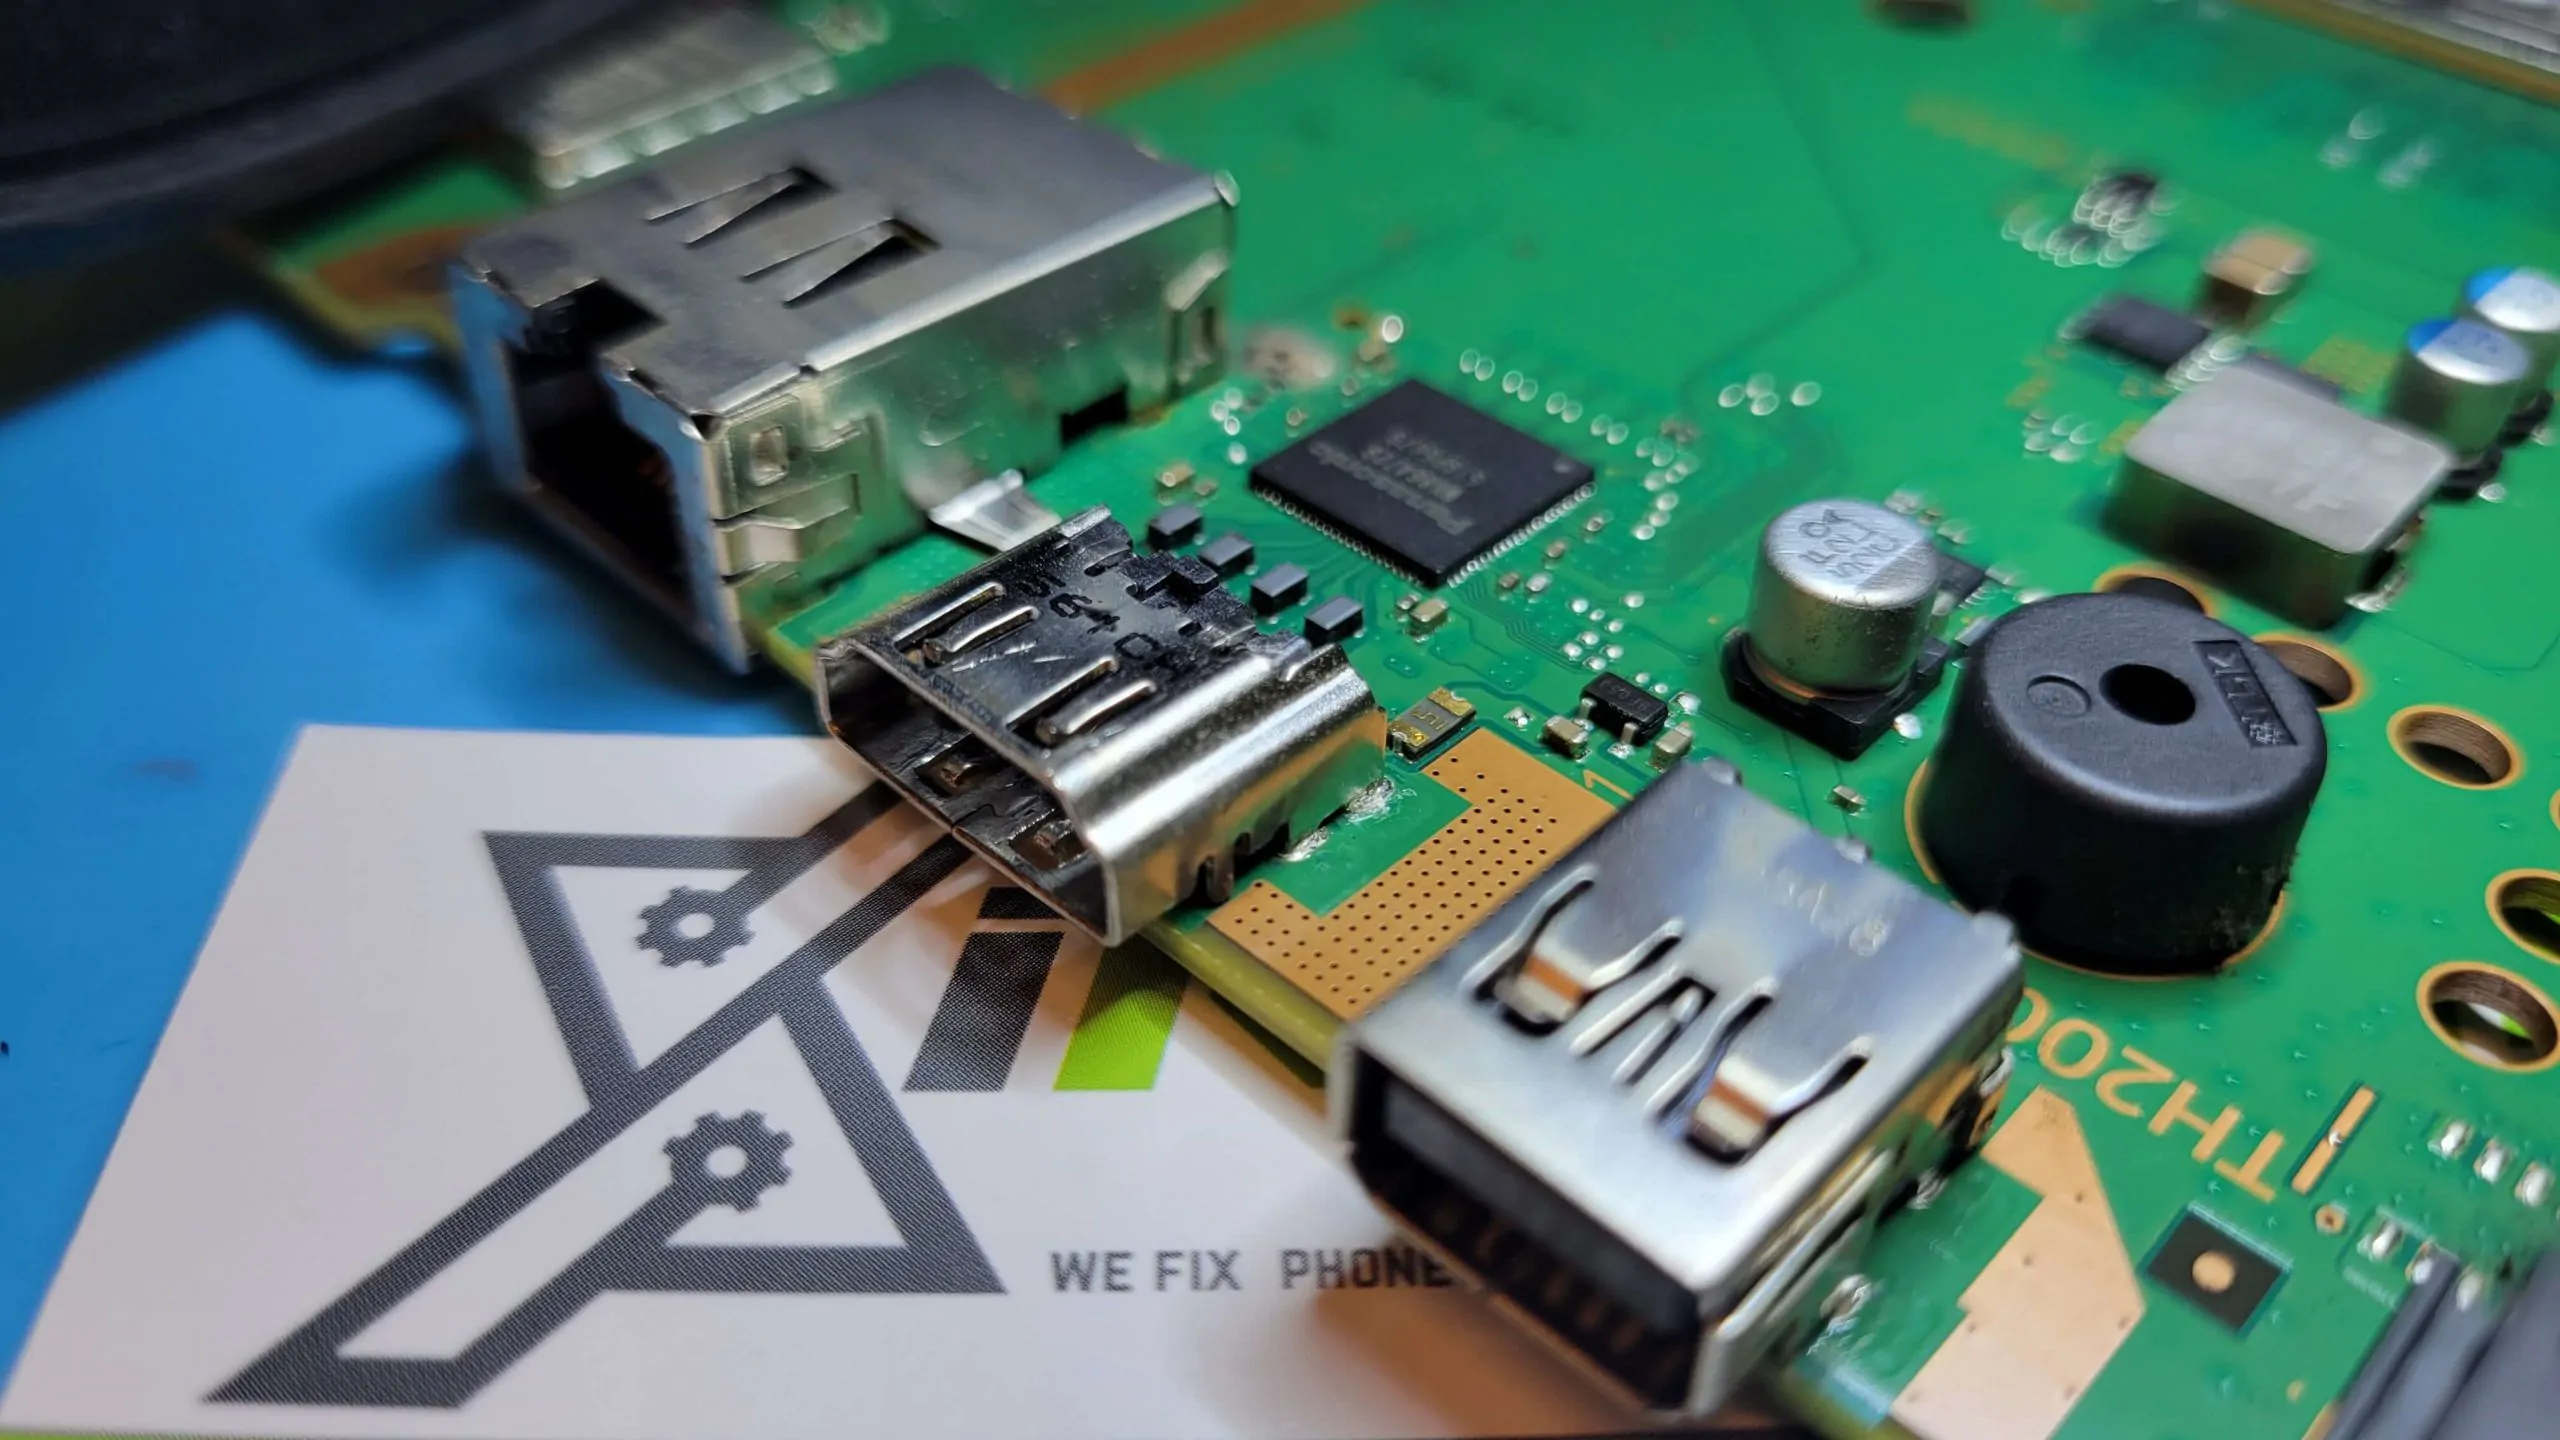 PlayStation 4 repairs for hard drives, HDMI port replacements, and